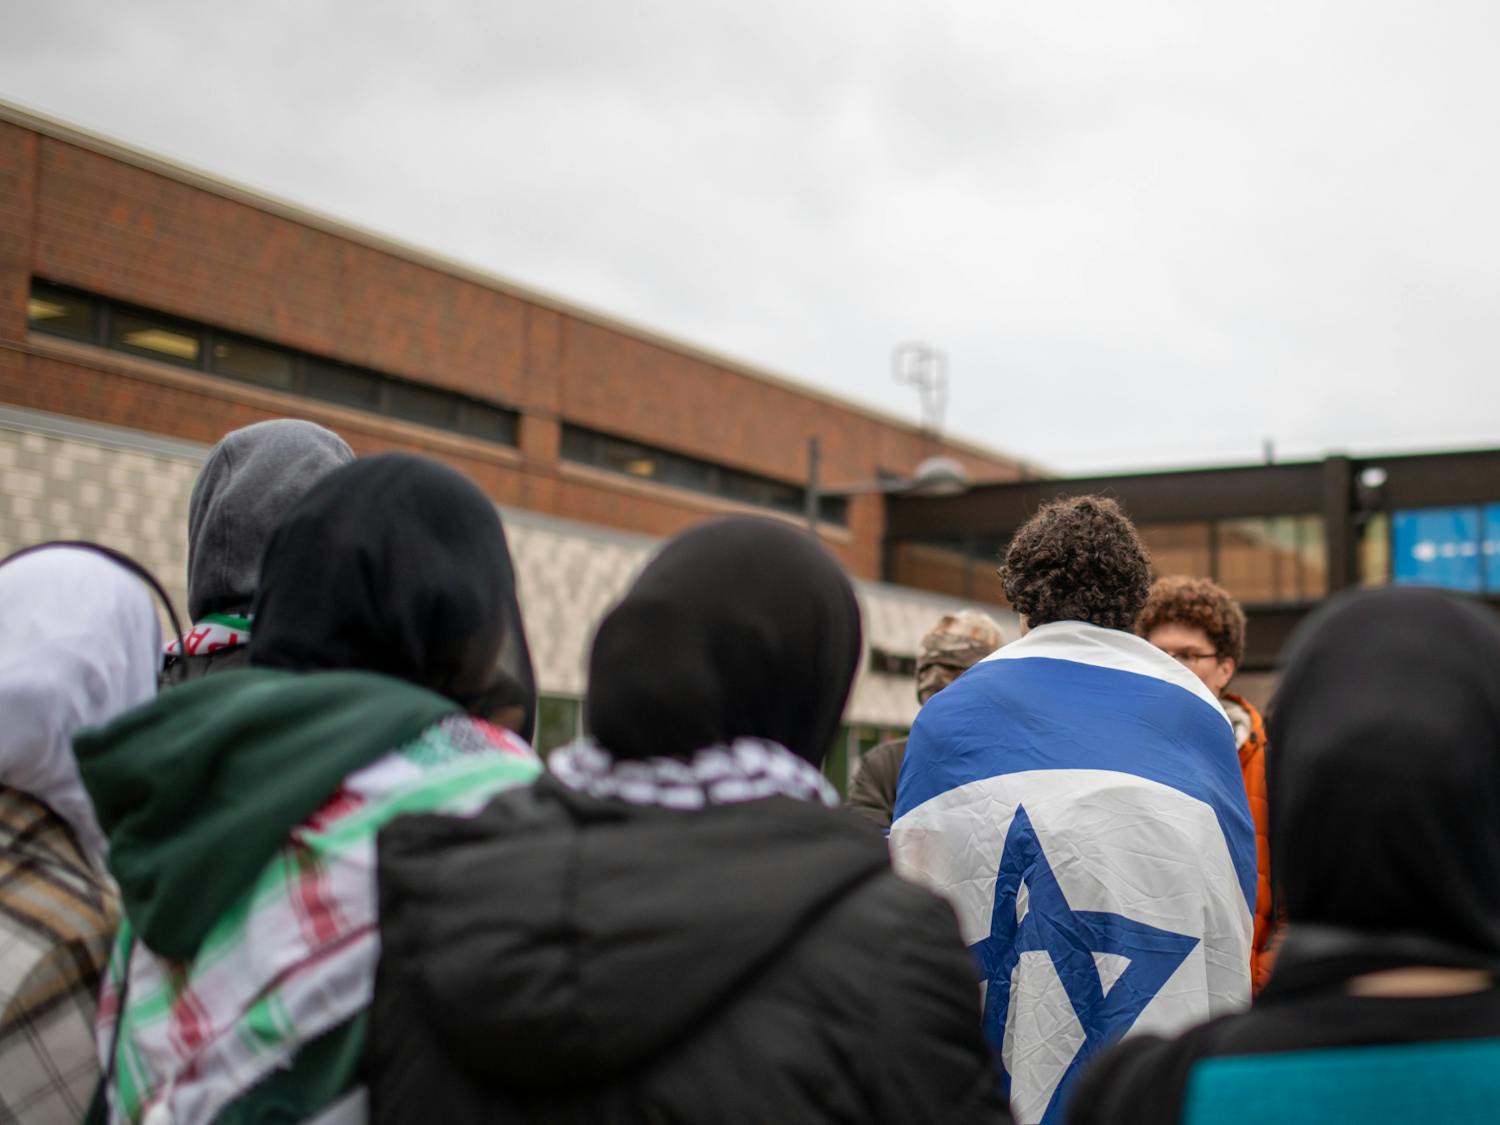 Protestors supporting Israel encountered pro-Palestine demonstrators on North Campus on Monday, Oct. 16.